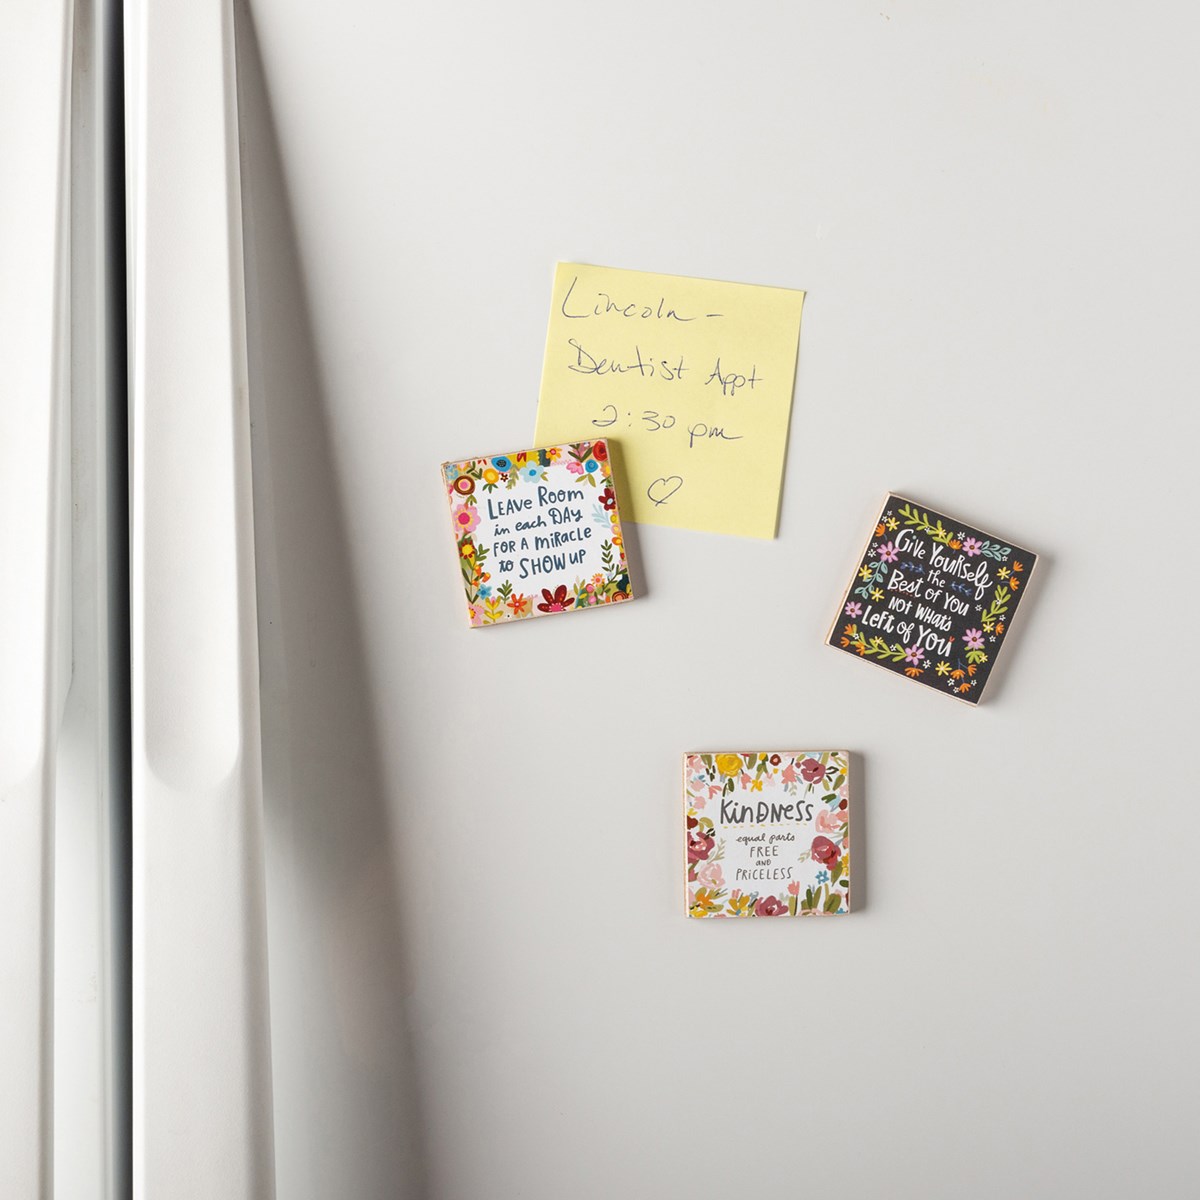 Magnet Set - Leave Room For A Miracle - 2" x 2", Card: 2.50" x 8" - Wood, Paper, Metal, Magnet